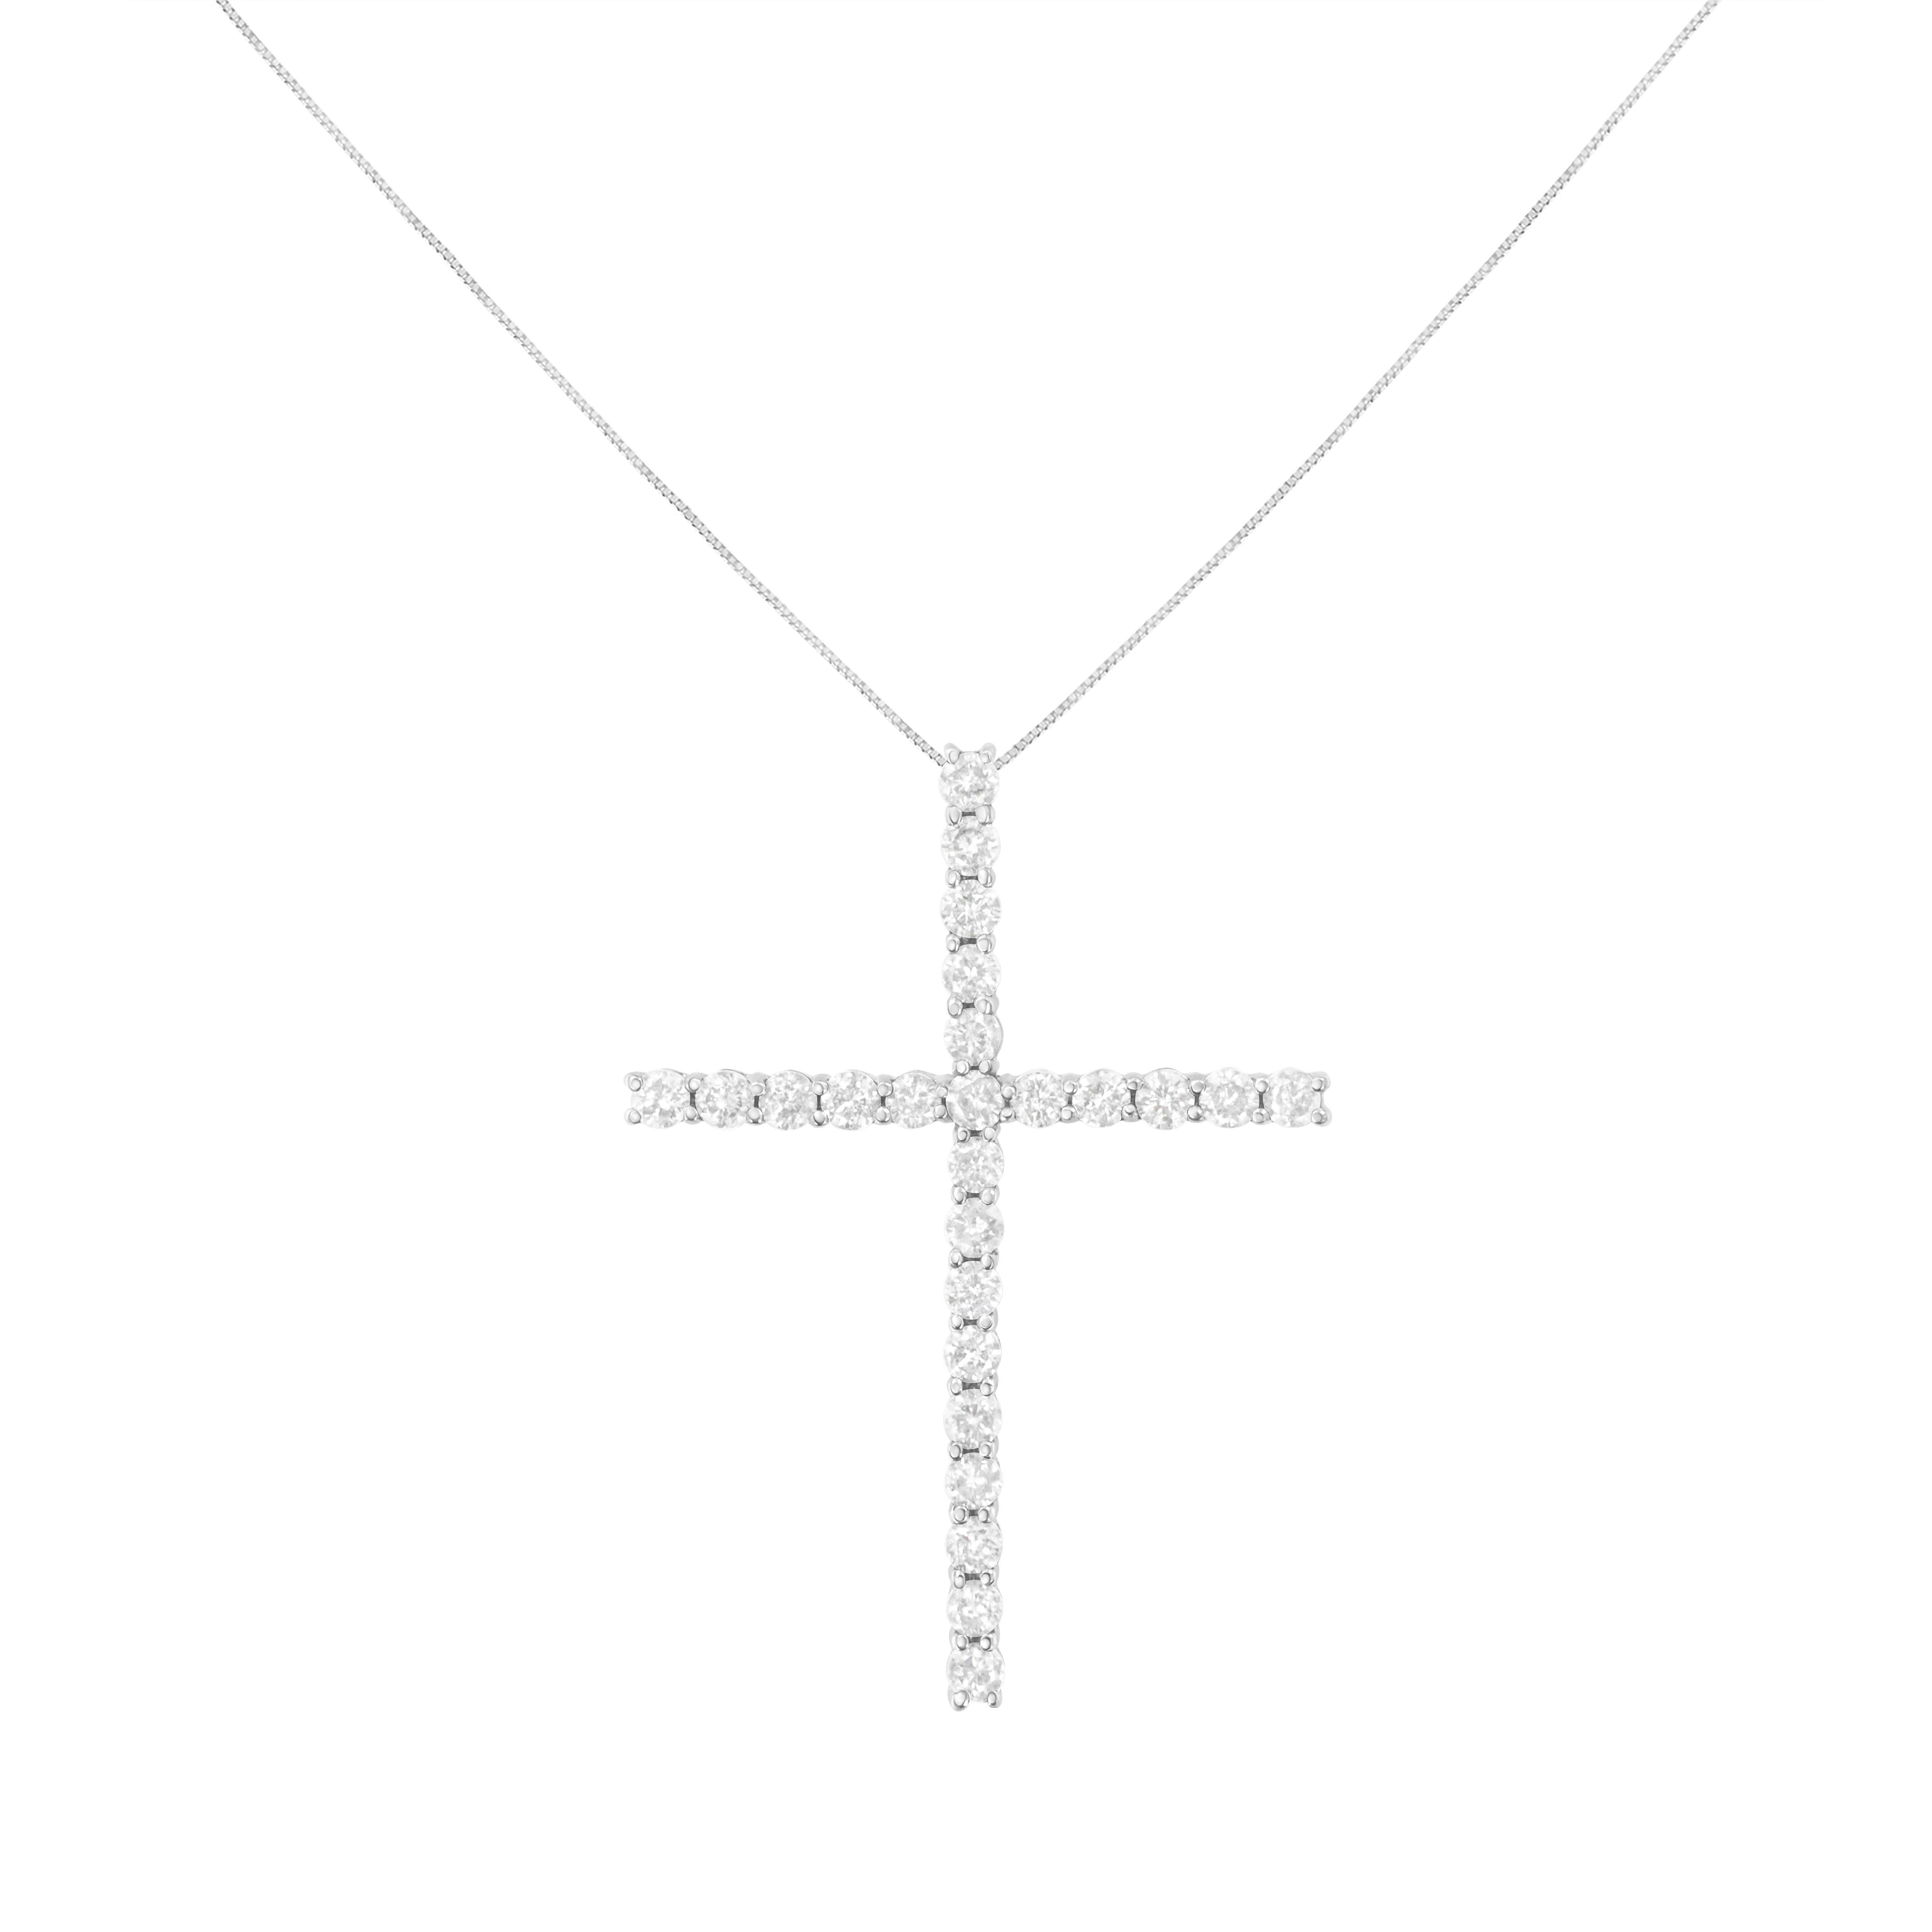 Share your faith with this stunning diamond cross pendant necklace. This cherished cross necklace for her, features 25 natural, round diamonds set in sterling silver. The pendant is suspended from an 18-inch box chain with spring ring. This fine